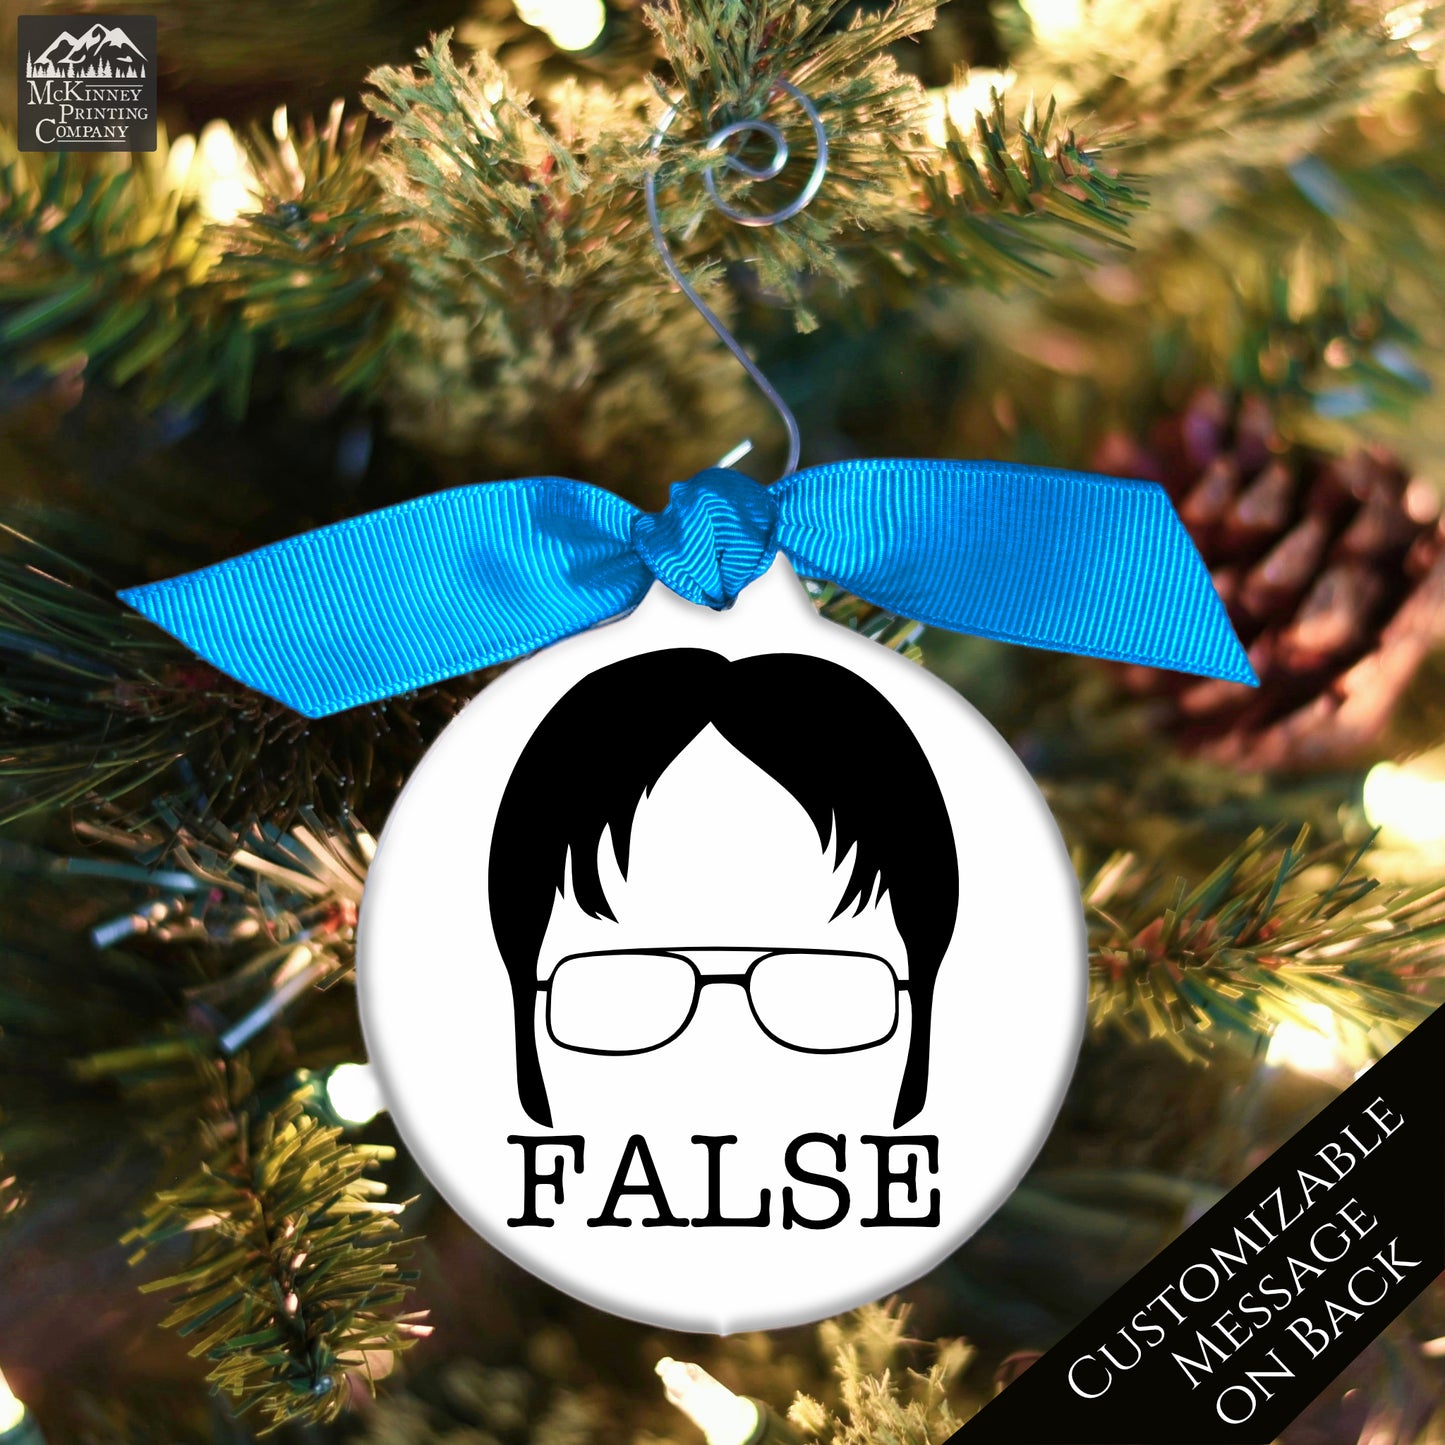 The Office TV Show - Christmas Ornament, Dwight Schrute, False, Quote